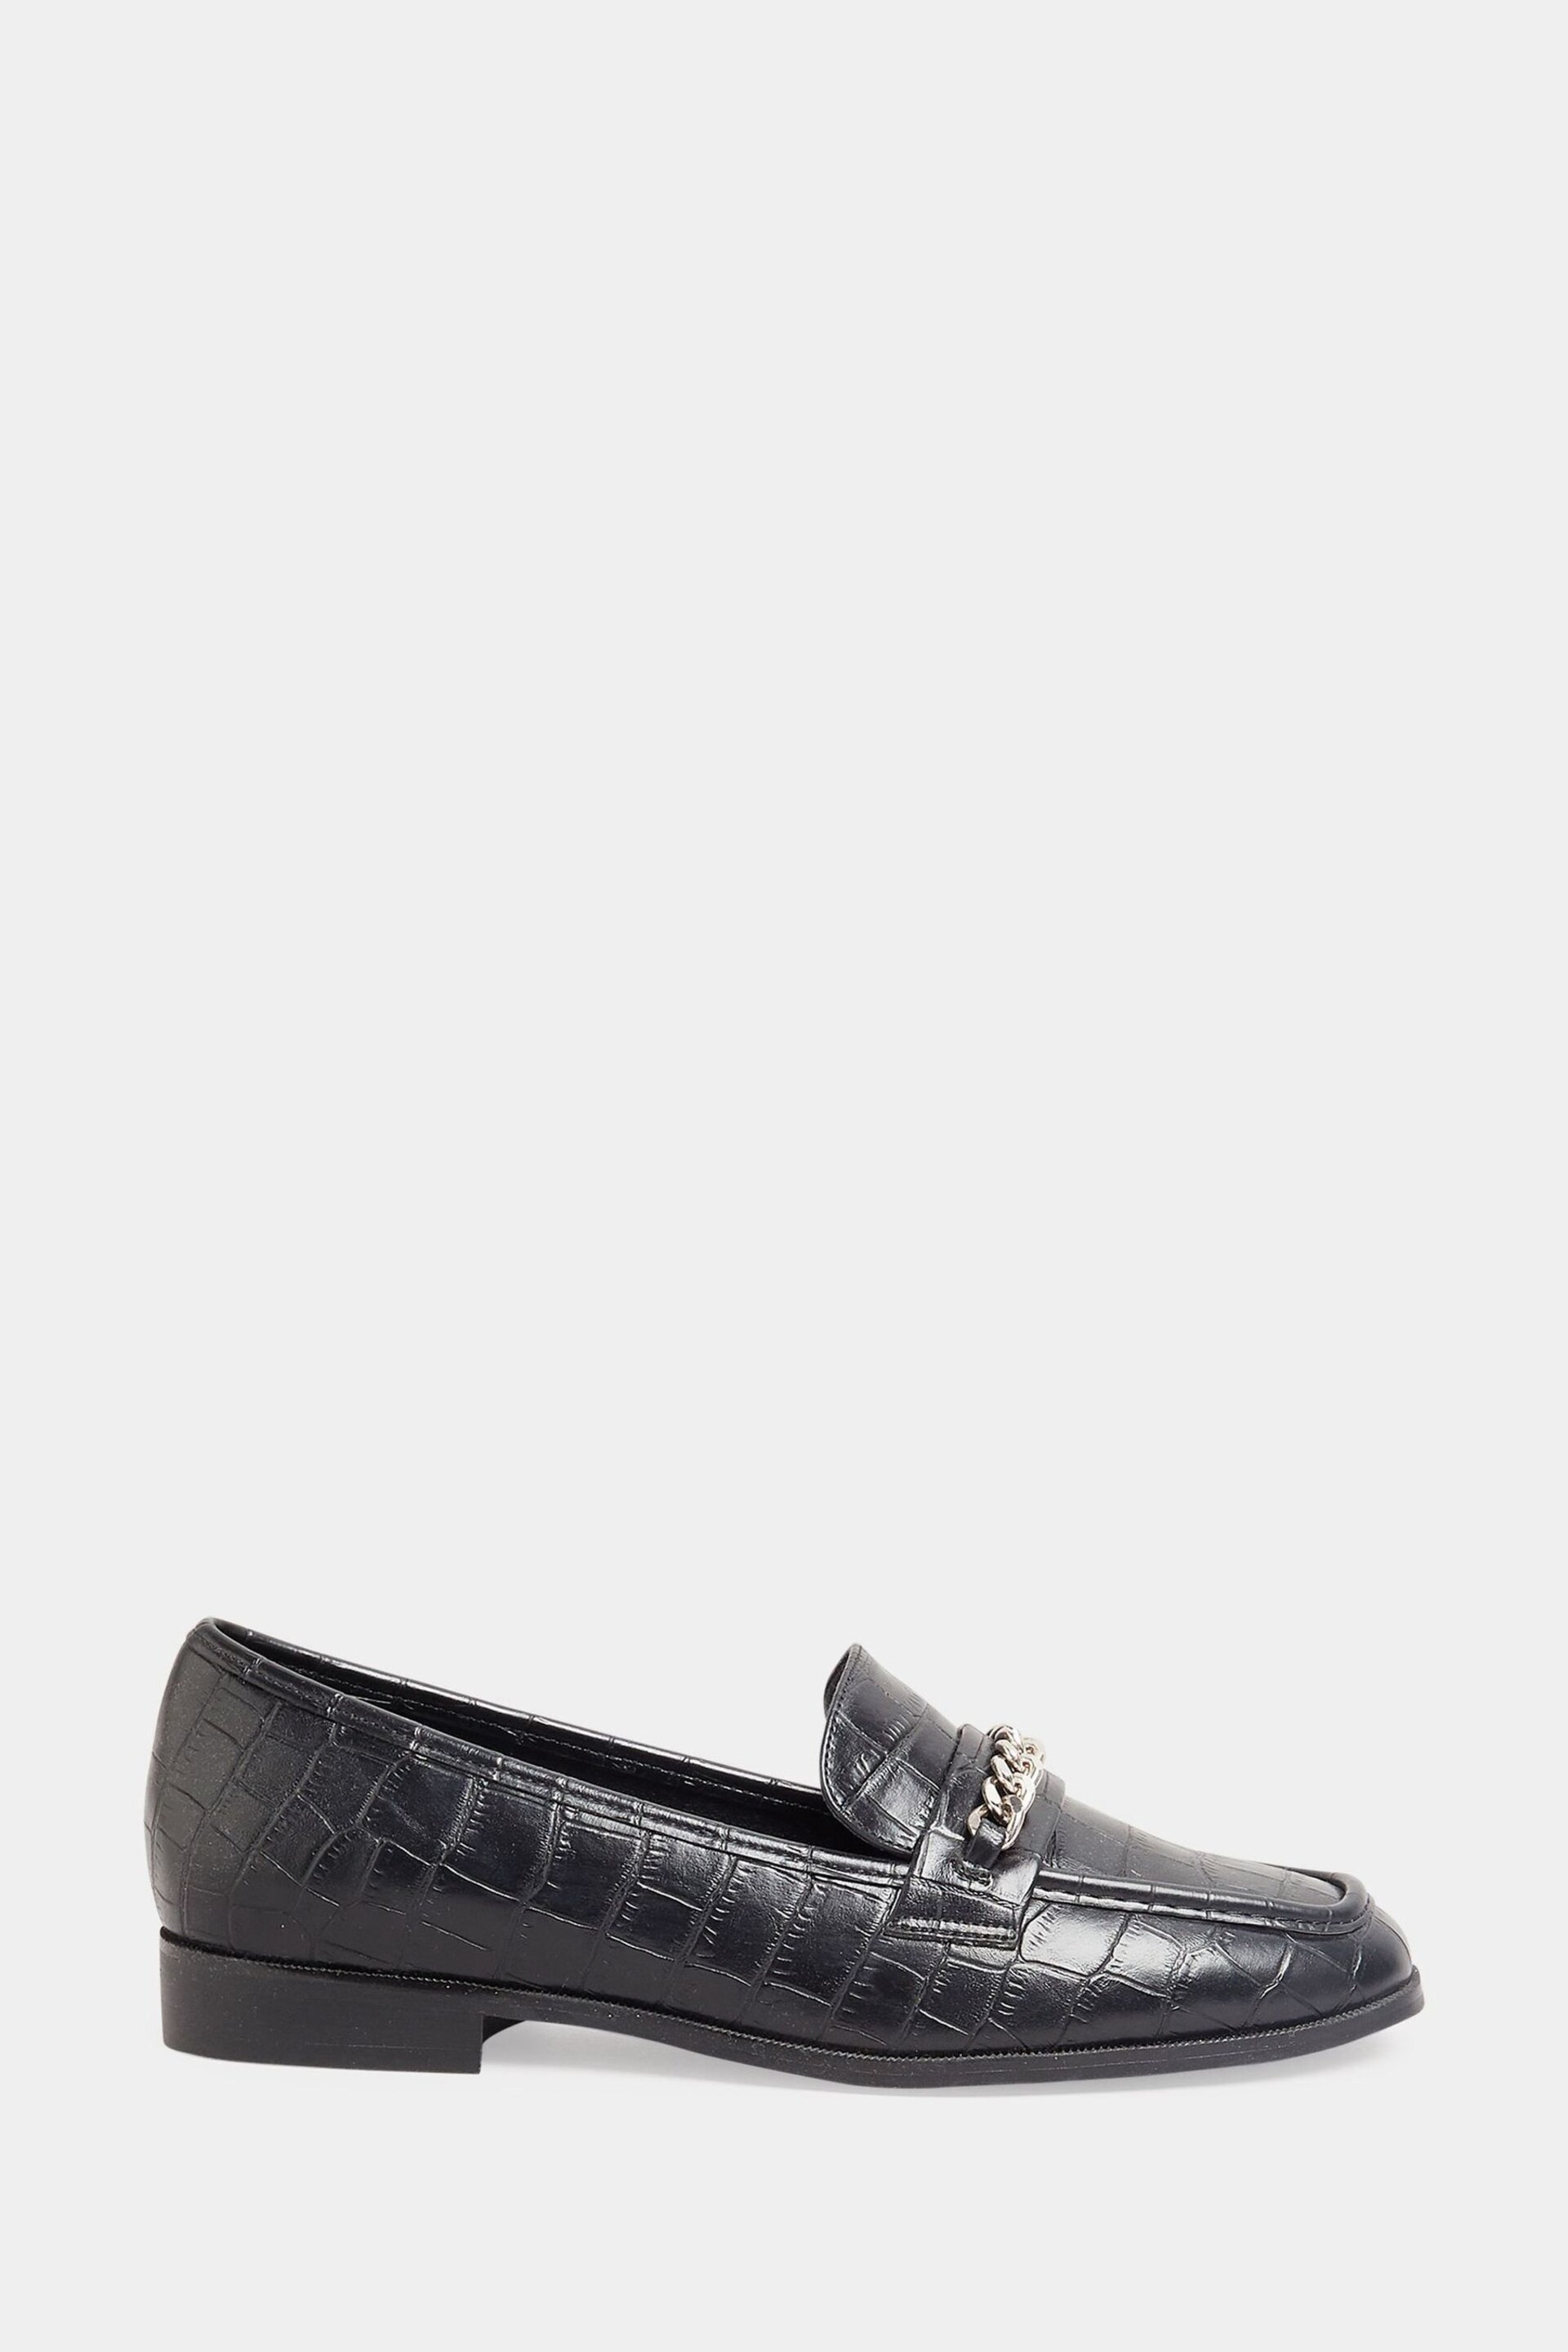 Long Tall Sally Black Hardware Trim Loafers - Image 1 of 4